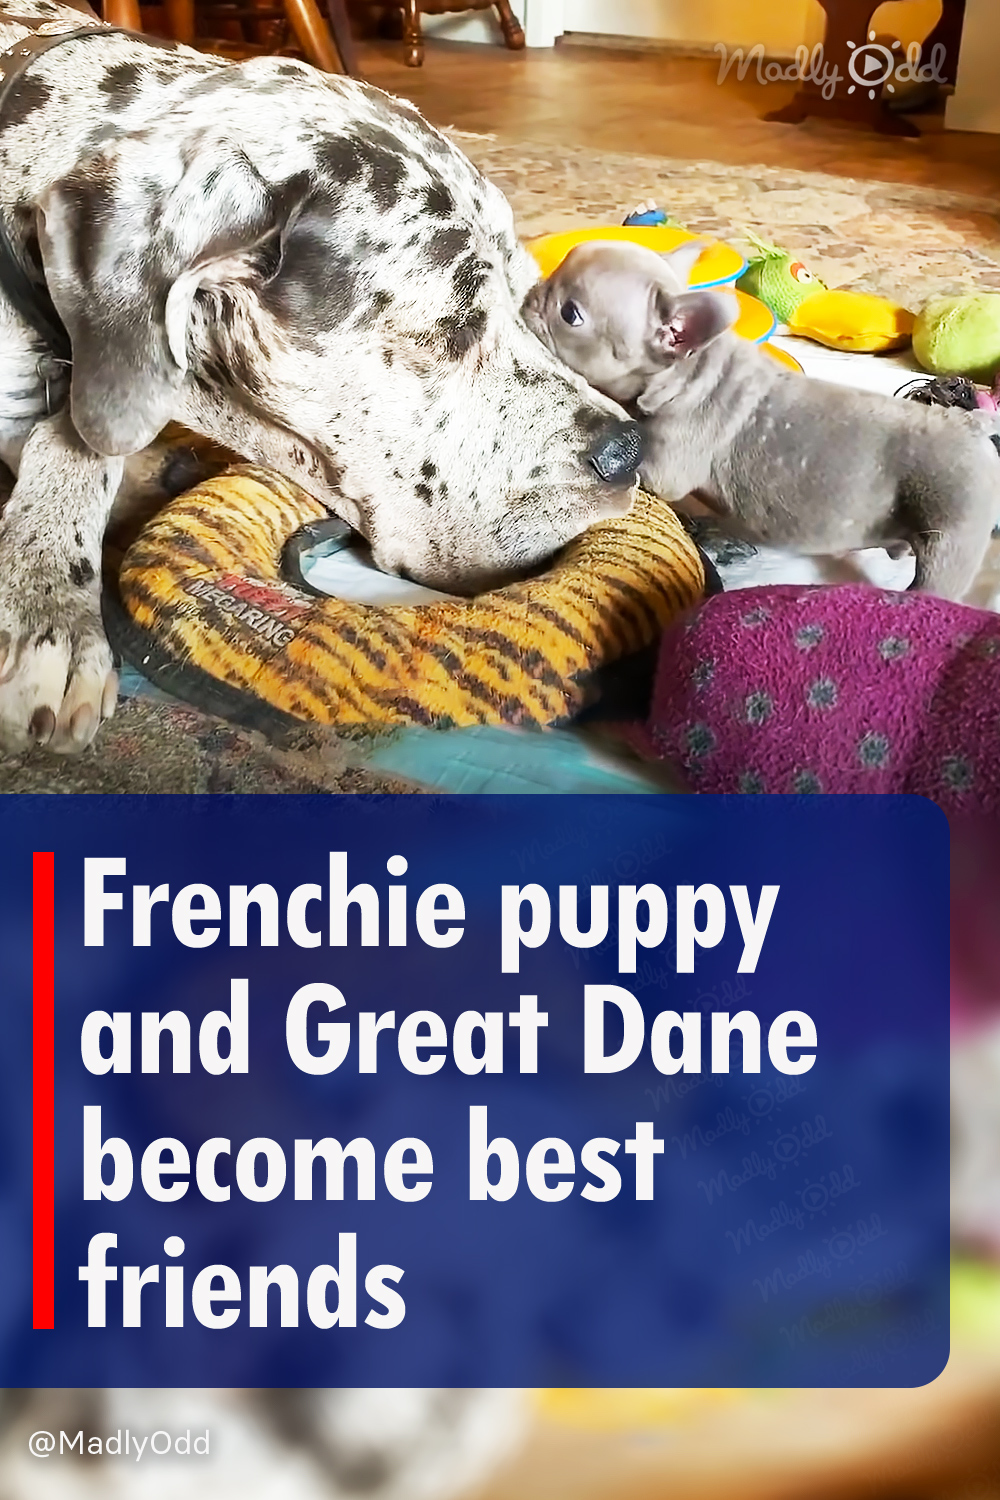 Frenchie puppy and Great Dane become best friends